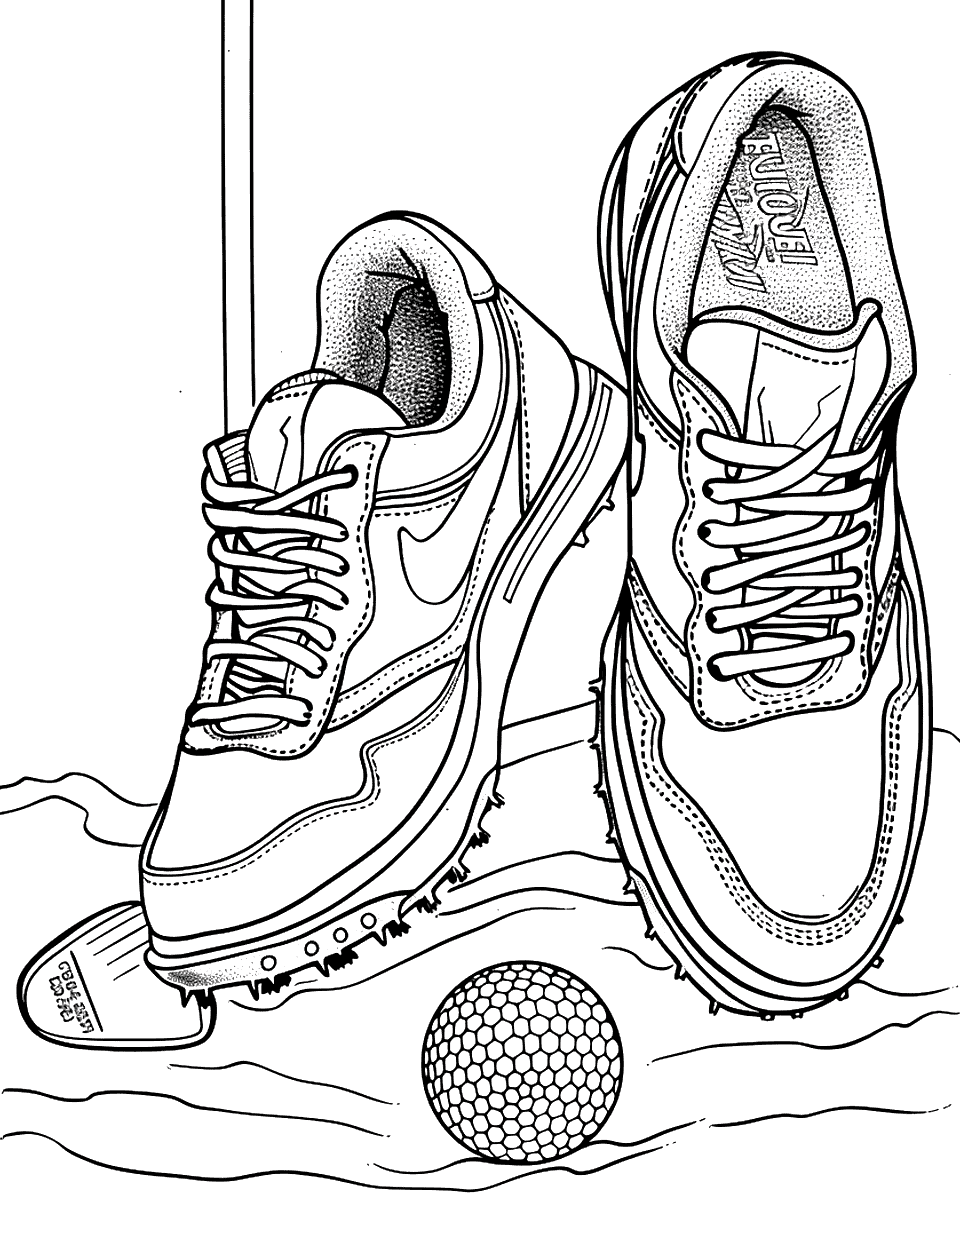 Golf Shoes at the Course Shoe Coloring Page - Golf shoes placed neatly next to a golf ball and club.